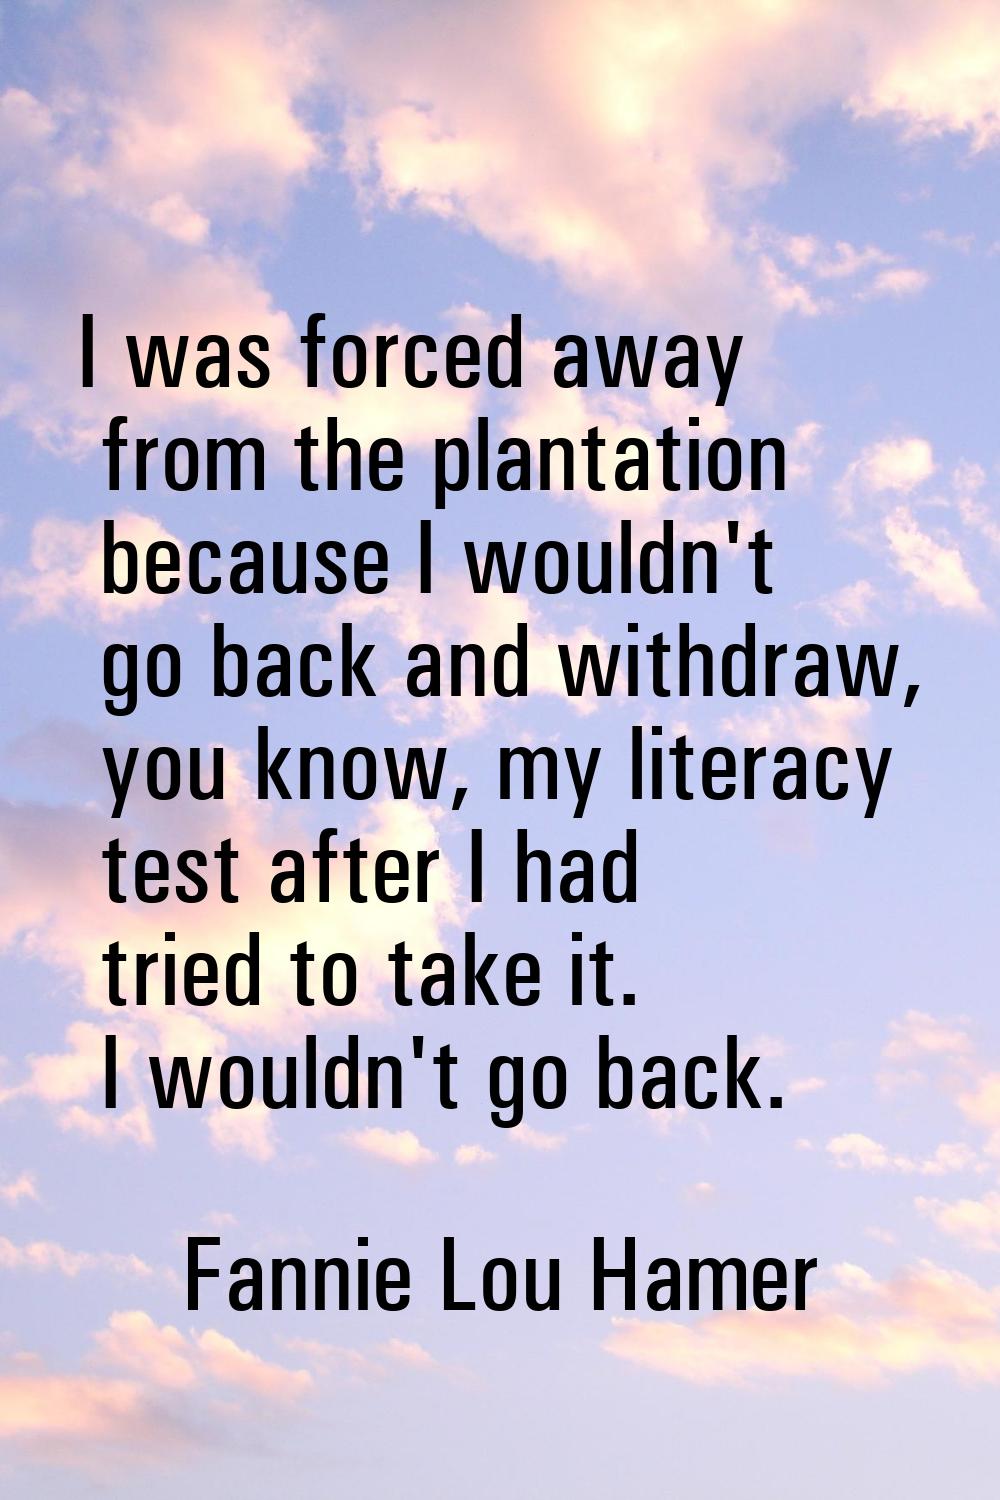 I was forced away from the plantation because I wouldn't go back and withdraw, you know, my literac